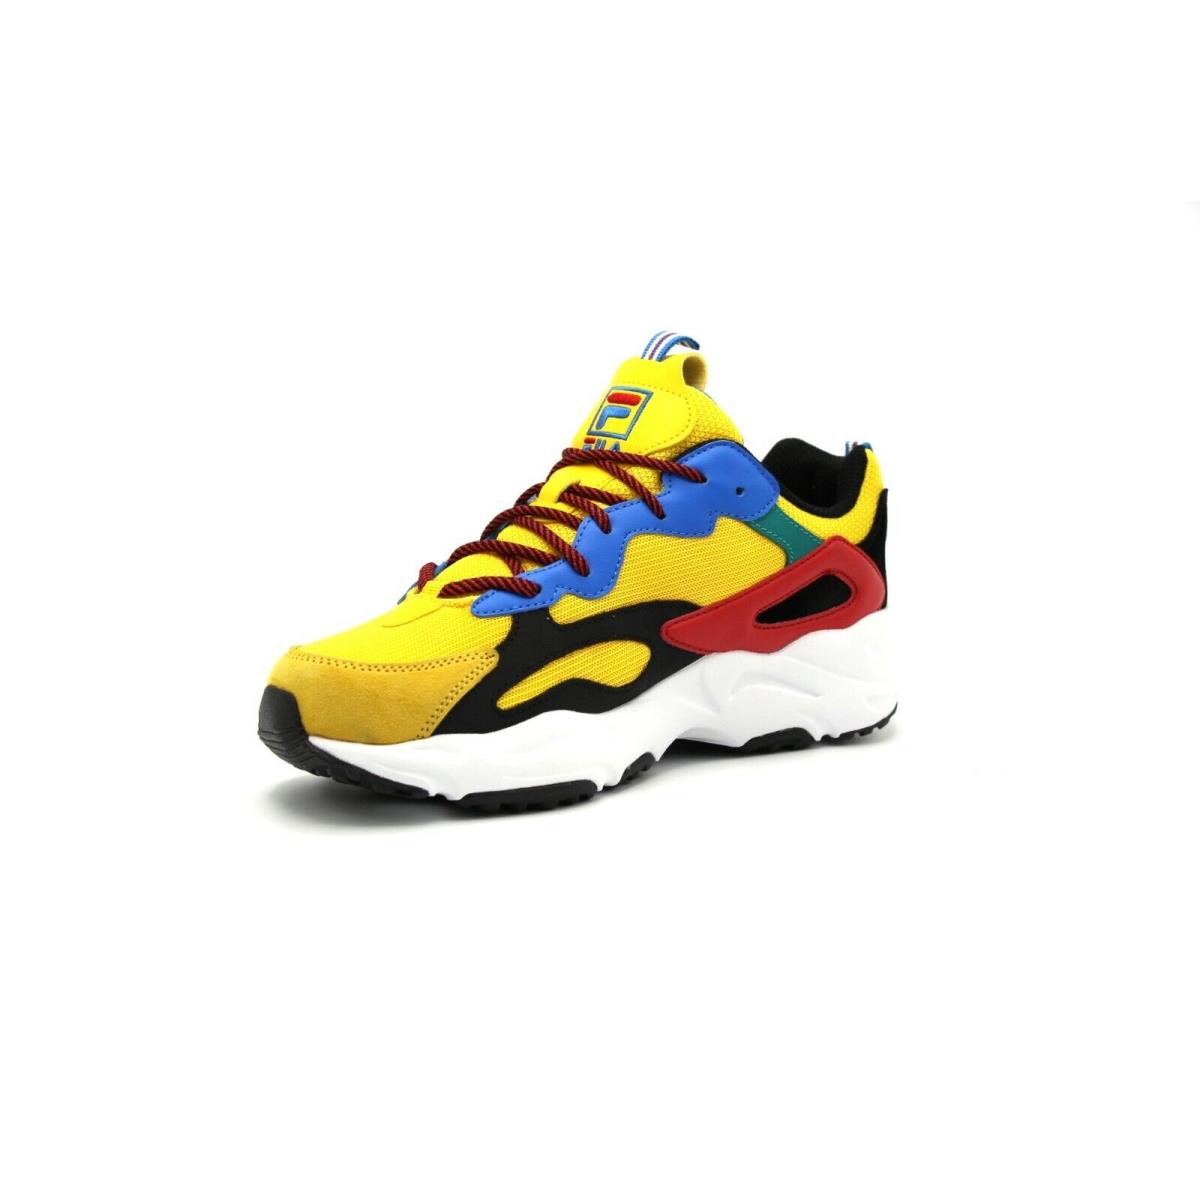 Fila shoes RAY TRACER - Yellow Red Blue Black White 1